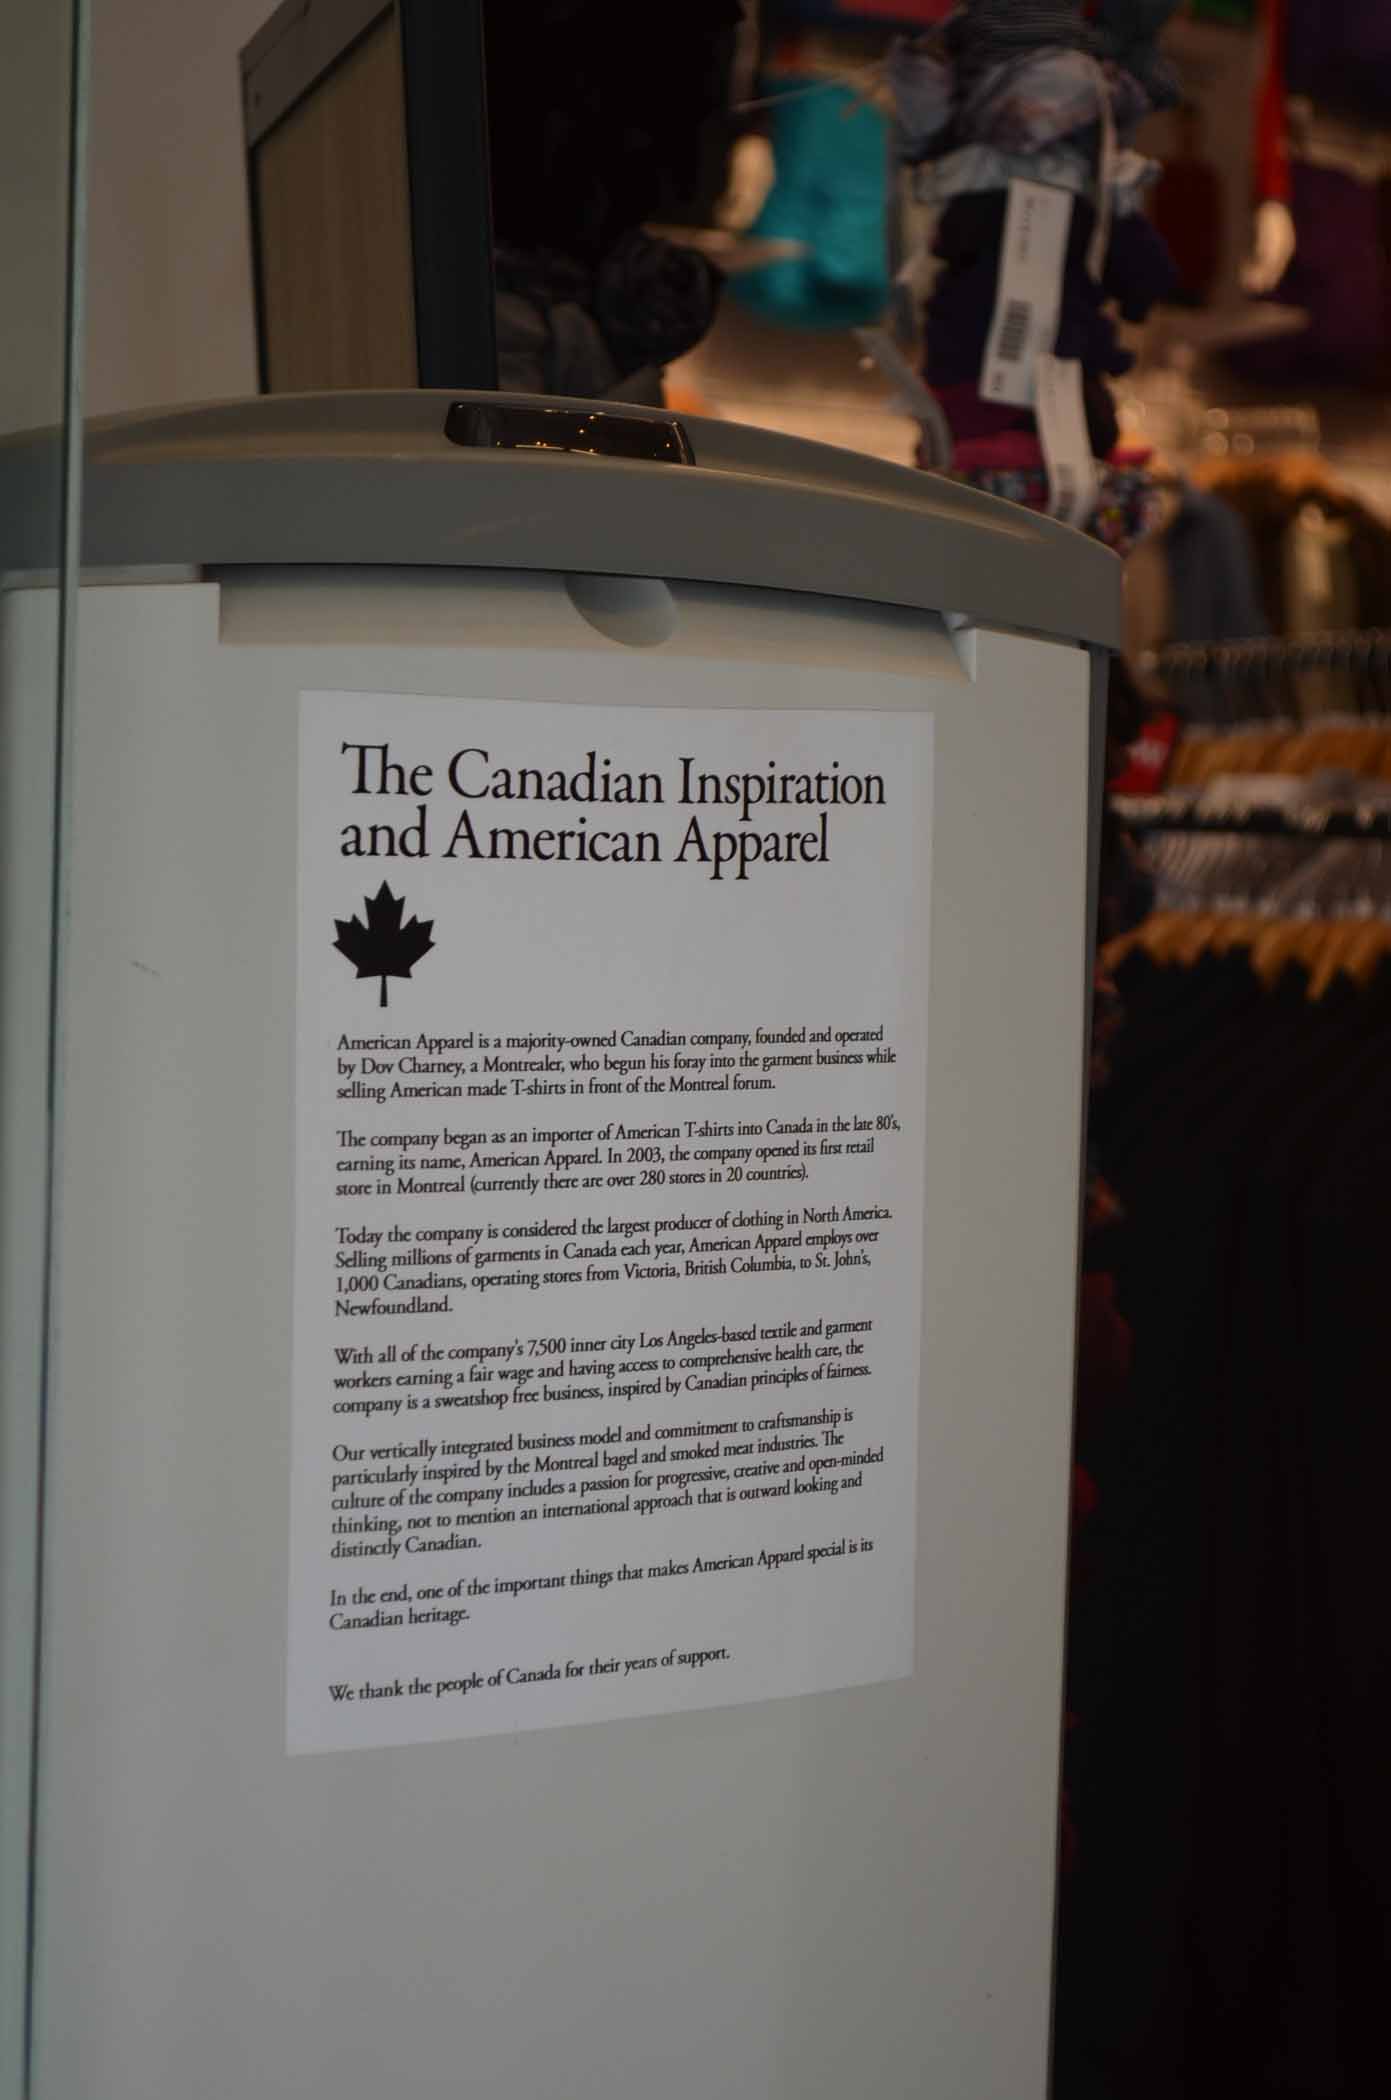 American Apparel is Canadian